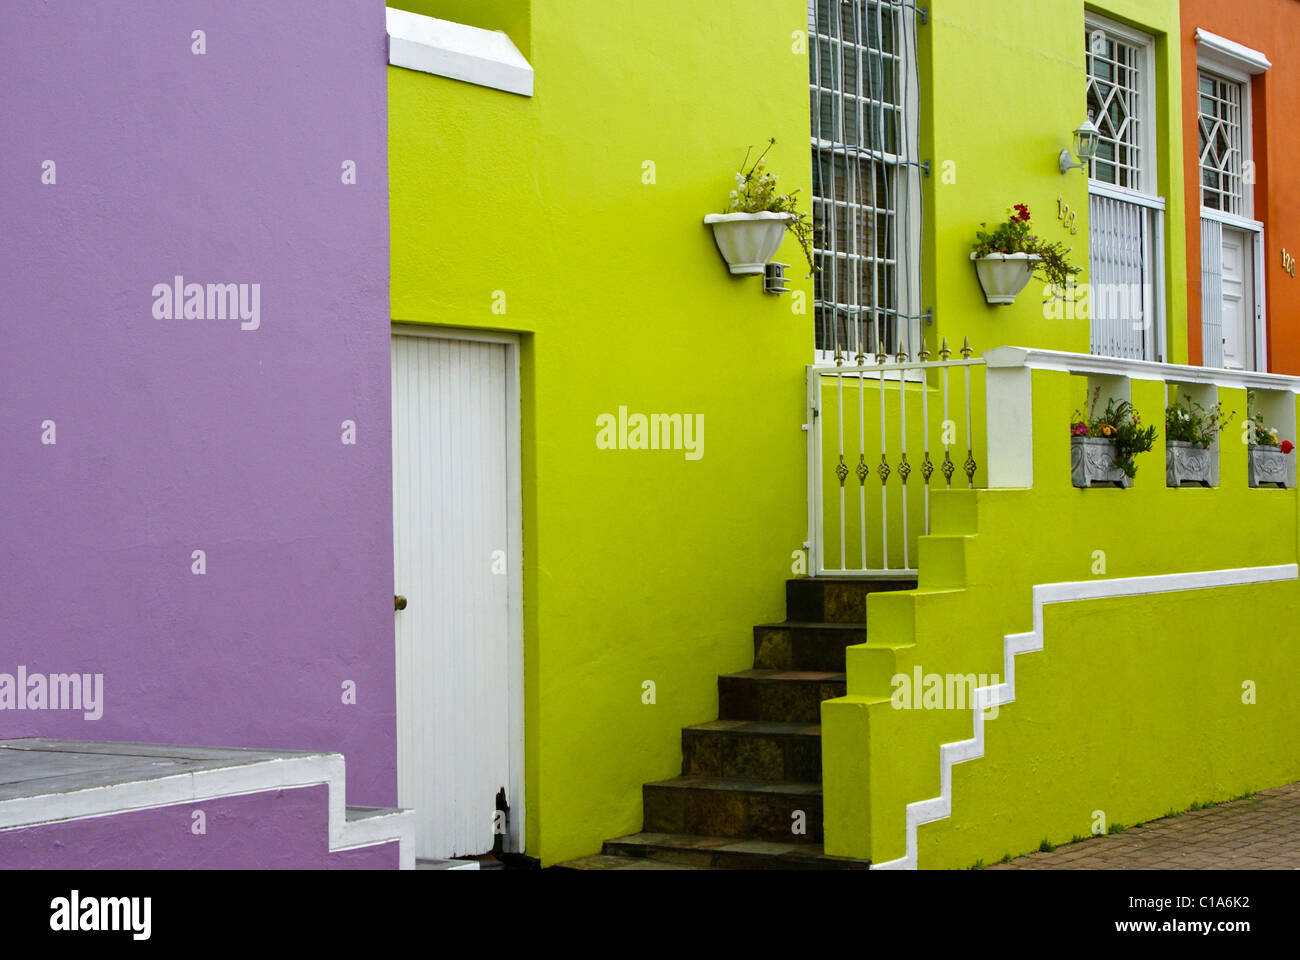 Bo-Kaap Malay Quarter, Cape Town, Western Cape, South Africa Stock Photo